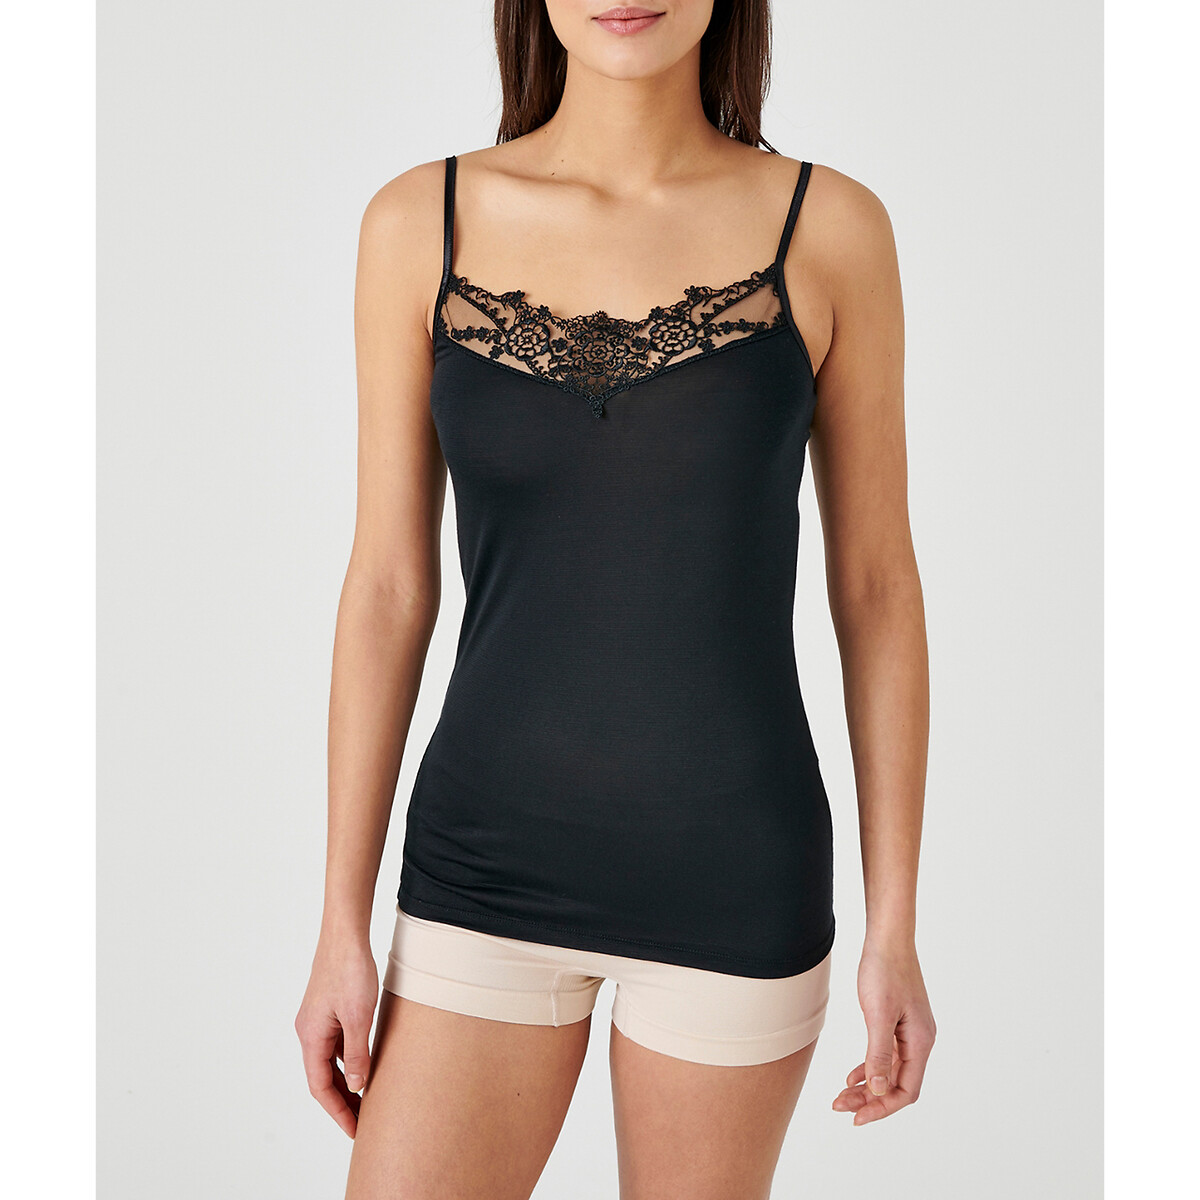 Thermolactyl Cami with Guipure Lace, Grade 1